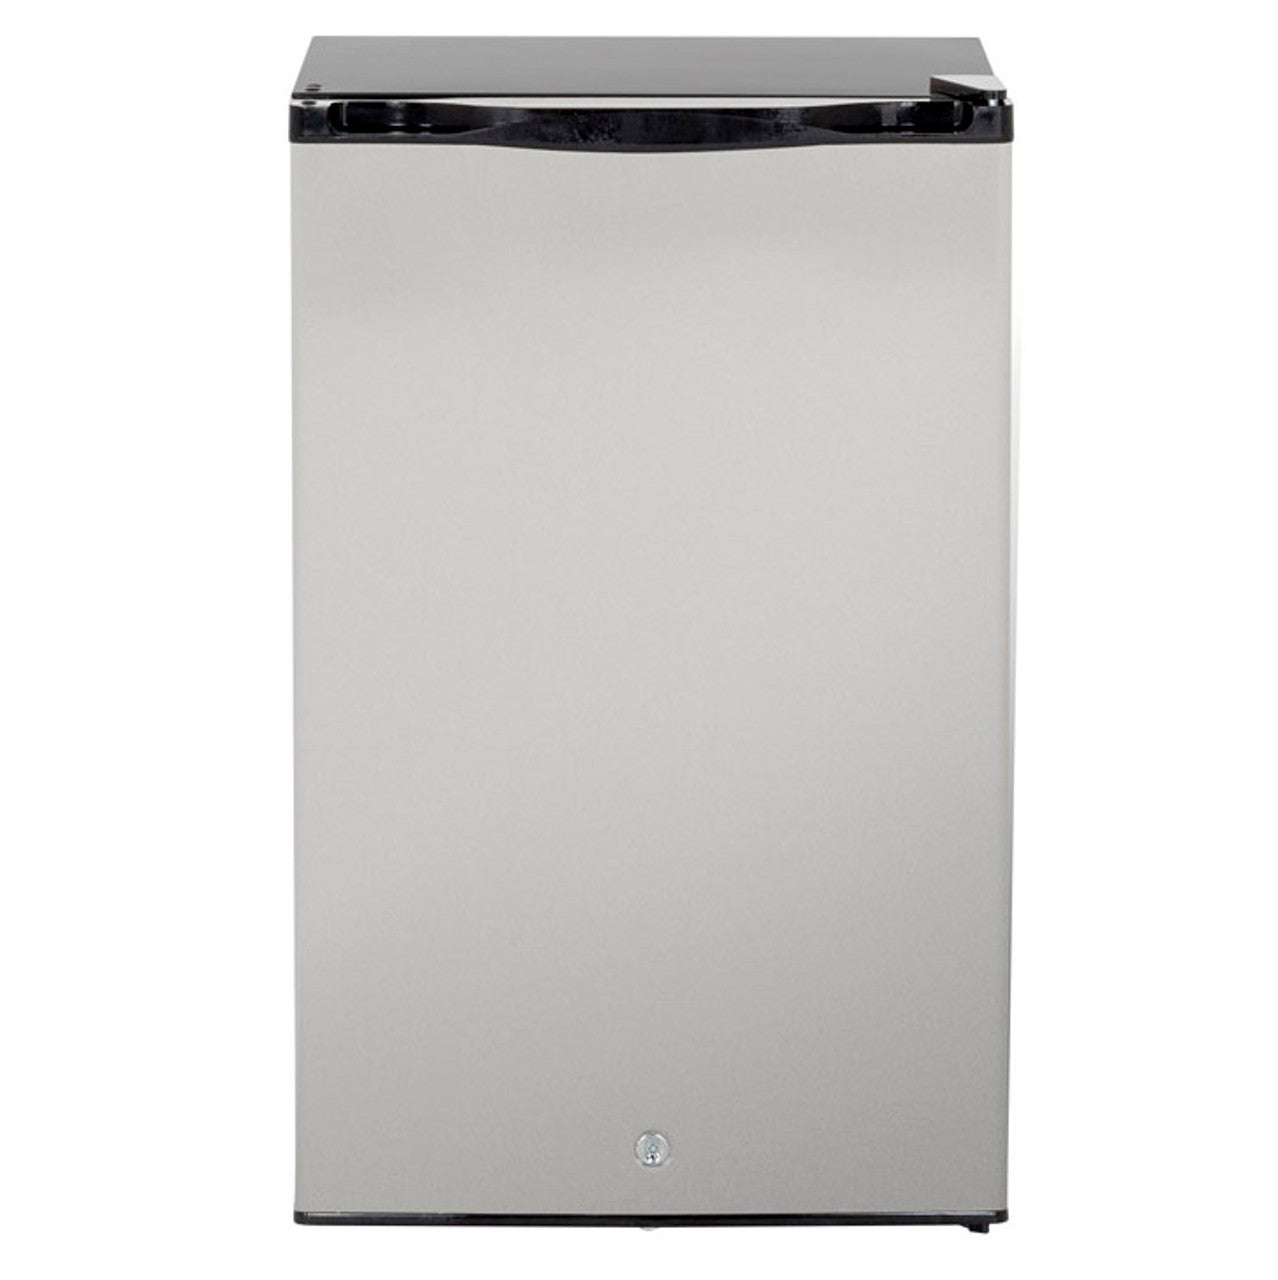 TrueFlame 21 4.2C Deluxe Compact Refrigerator - TF-RFR-21D-P Left to Right